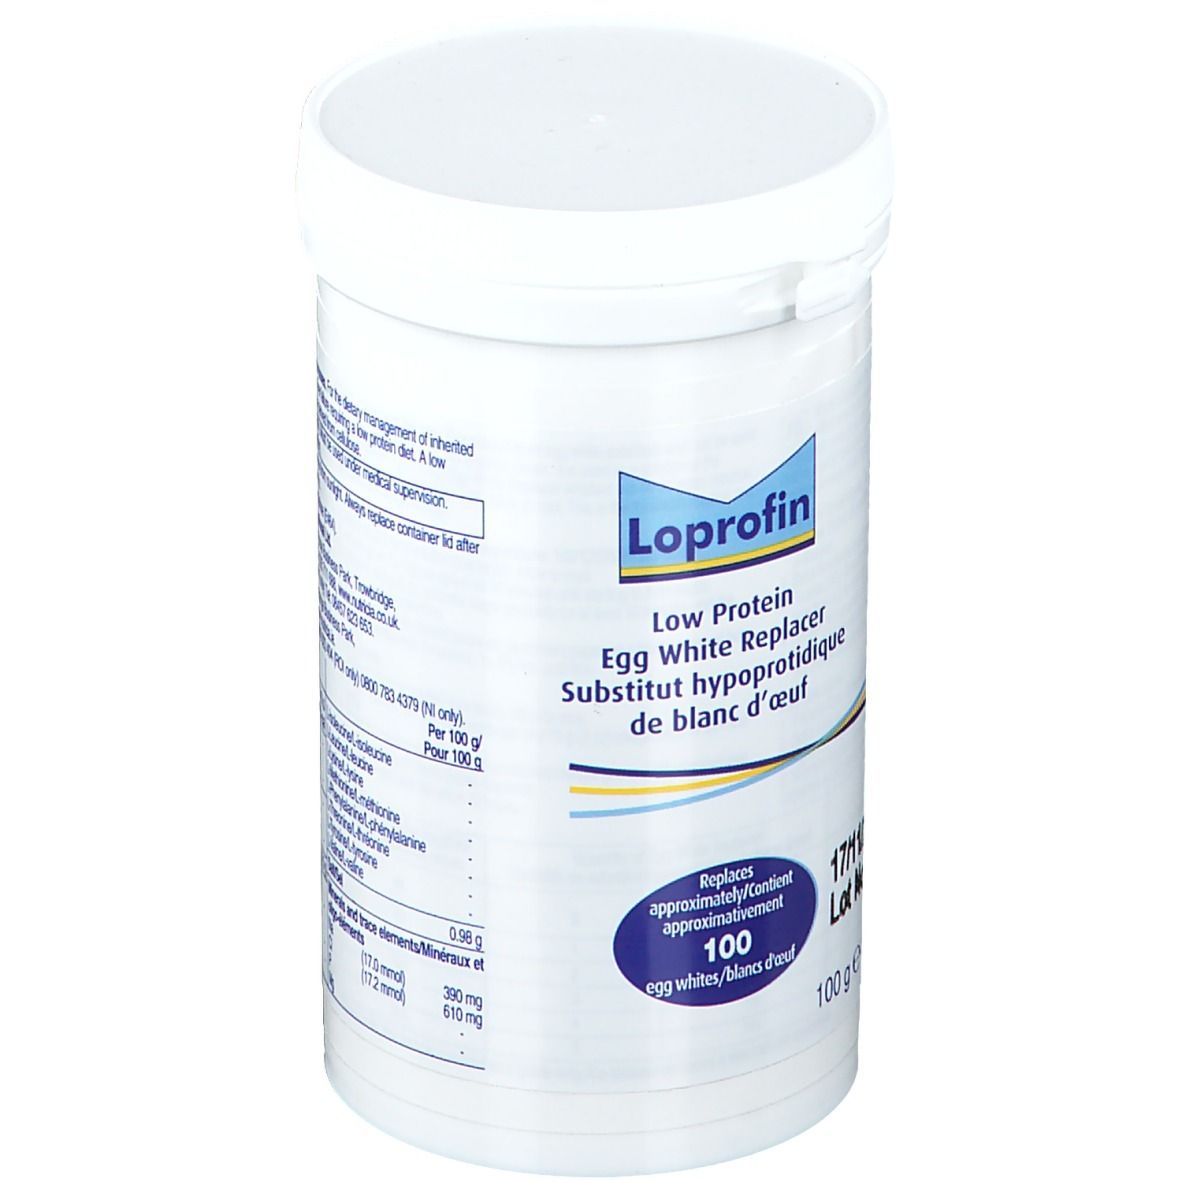 Loprofin Egg White Replacer